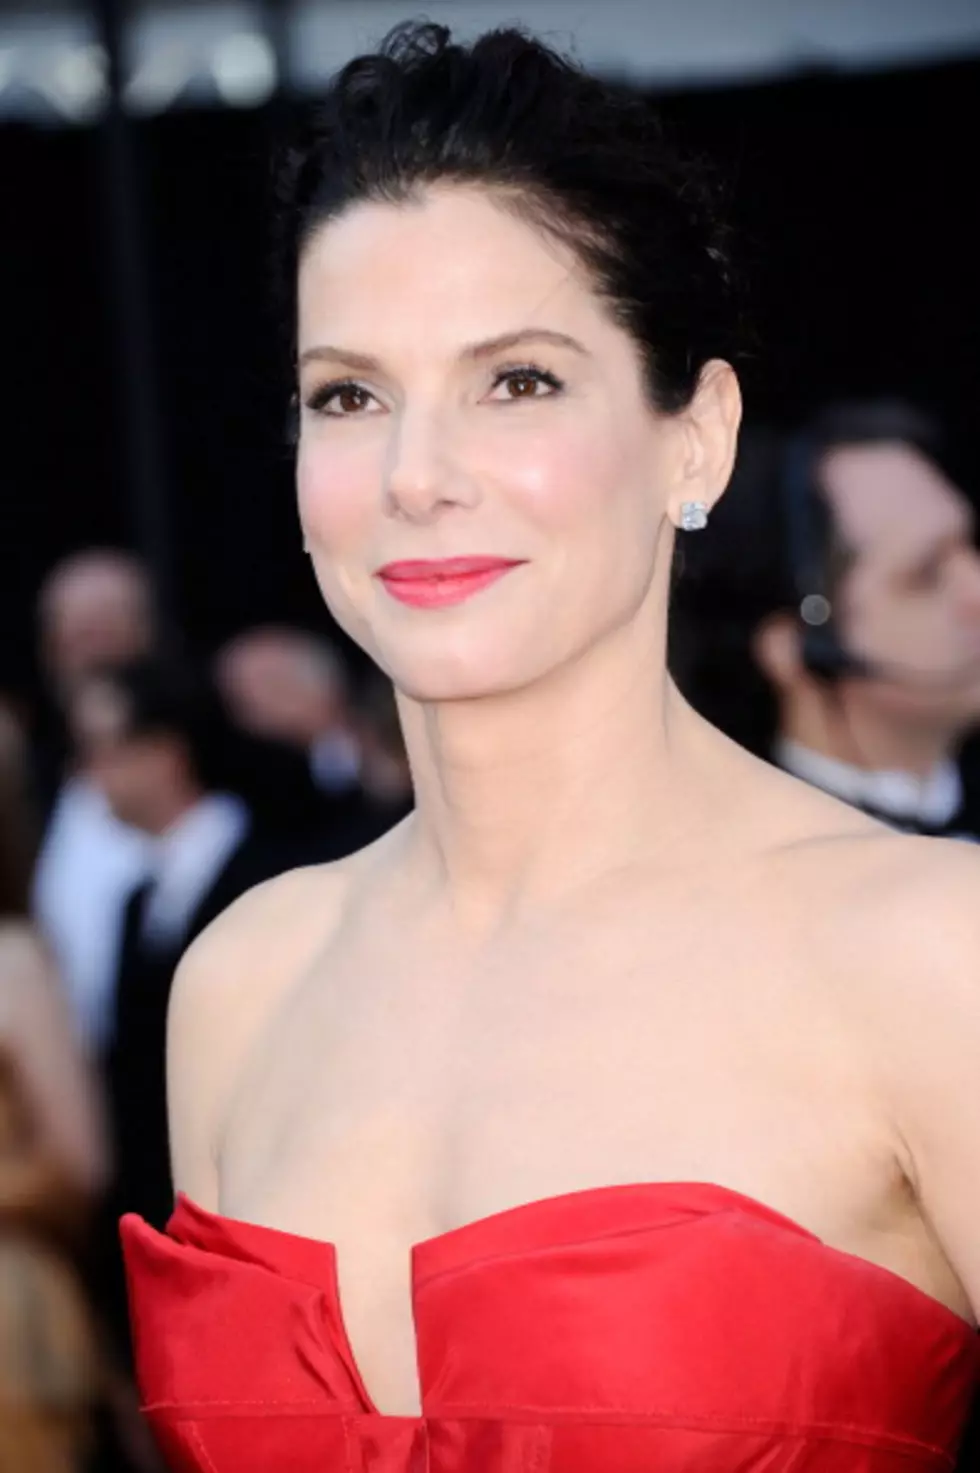 Celebrity Birthdays for Tuesday July 26 Include Sandra Bullock, Mick Jagger, and Helen Mirren